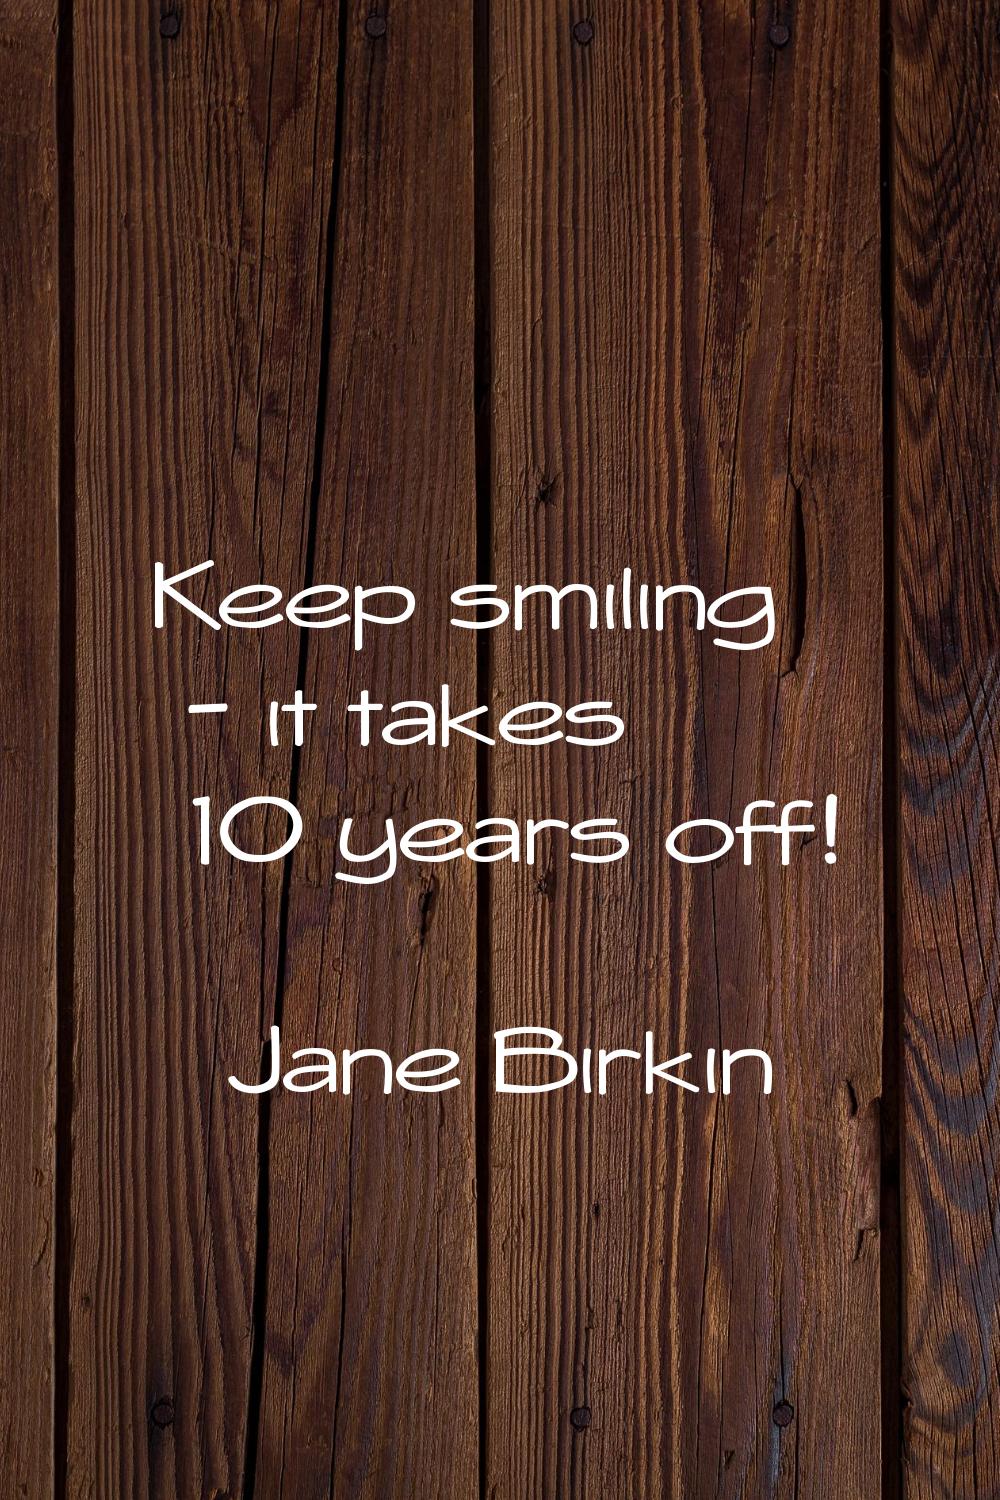 Keep smiling - it takes 10 years off!